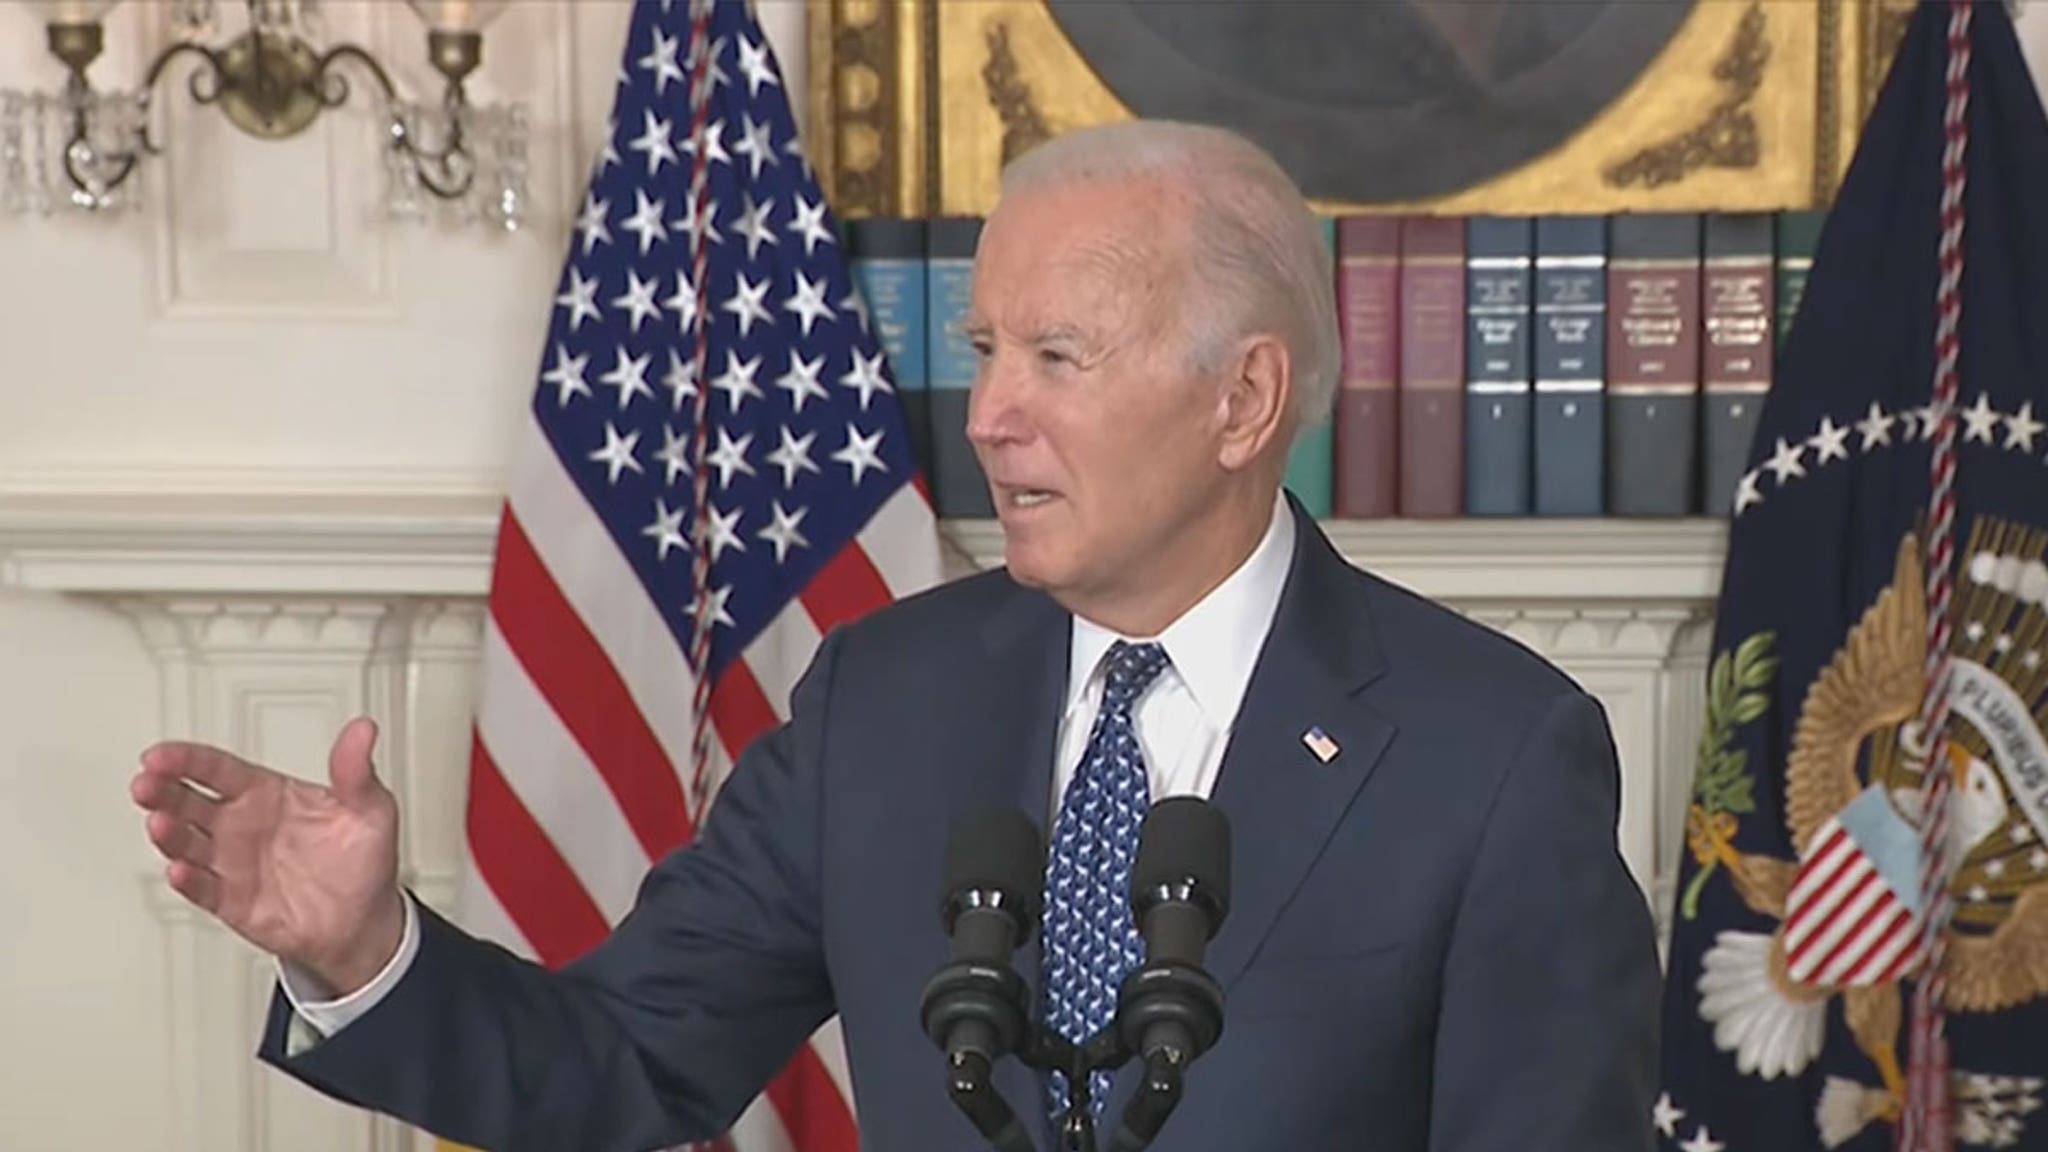 President Biden Spars with Media Over Memory After Special Counsel Report